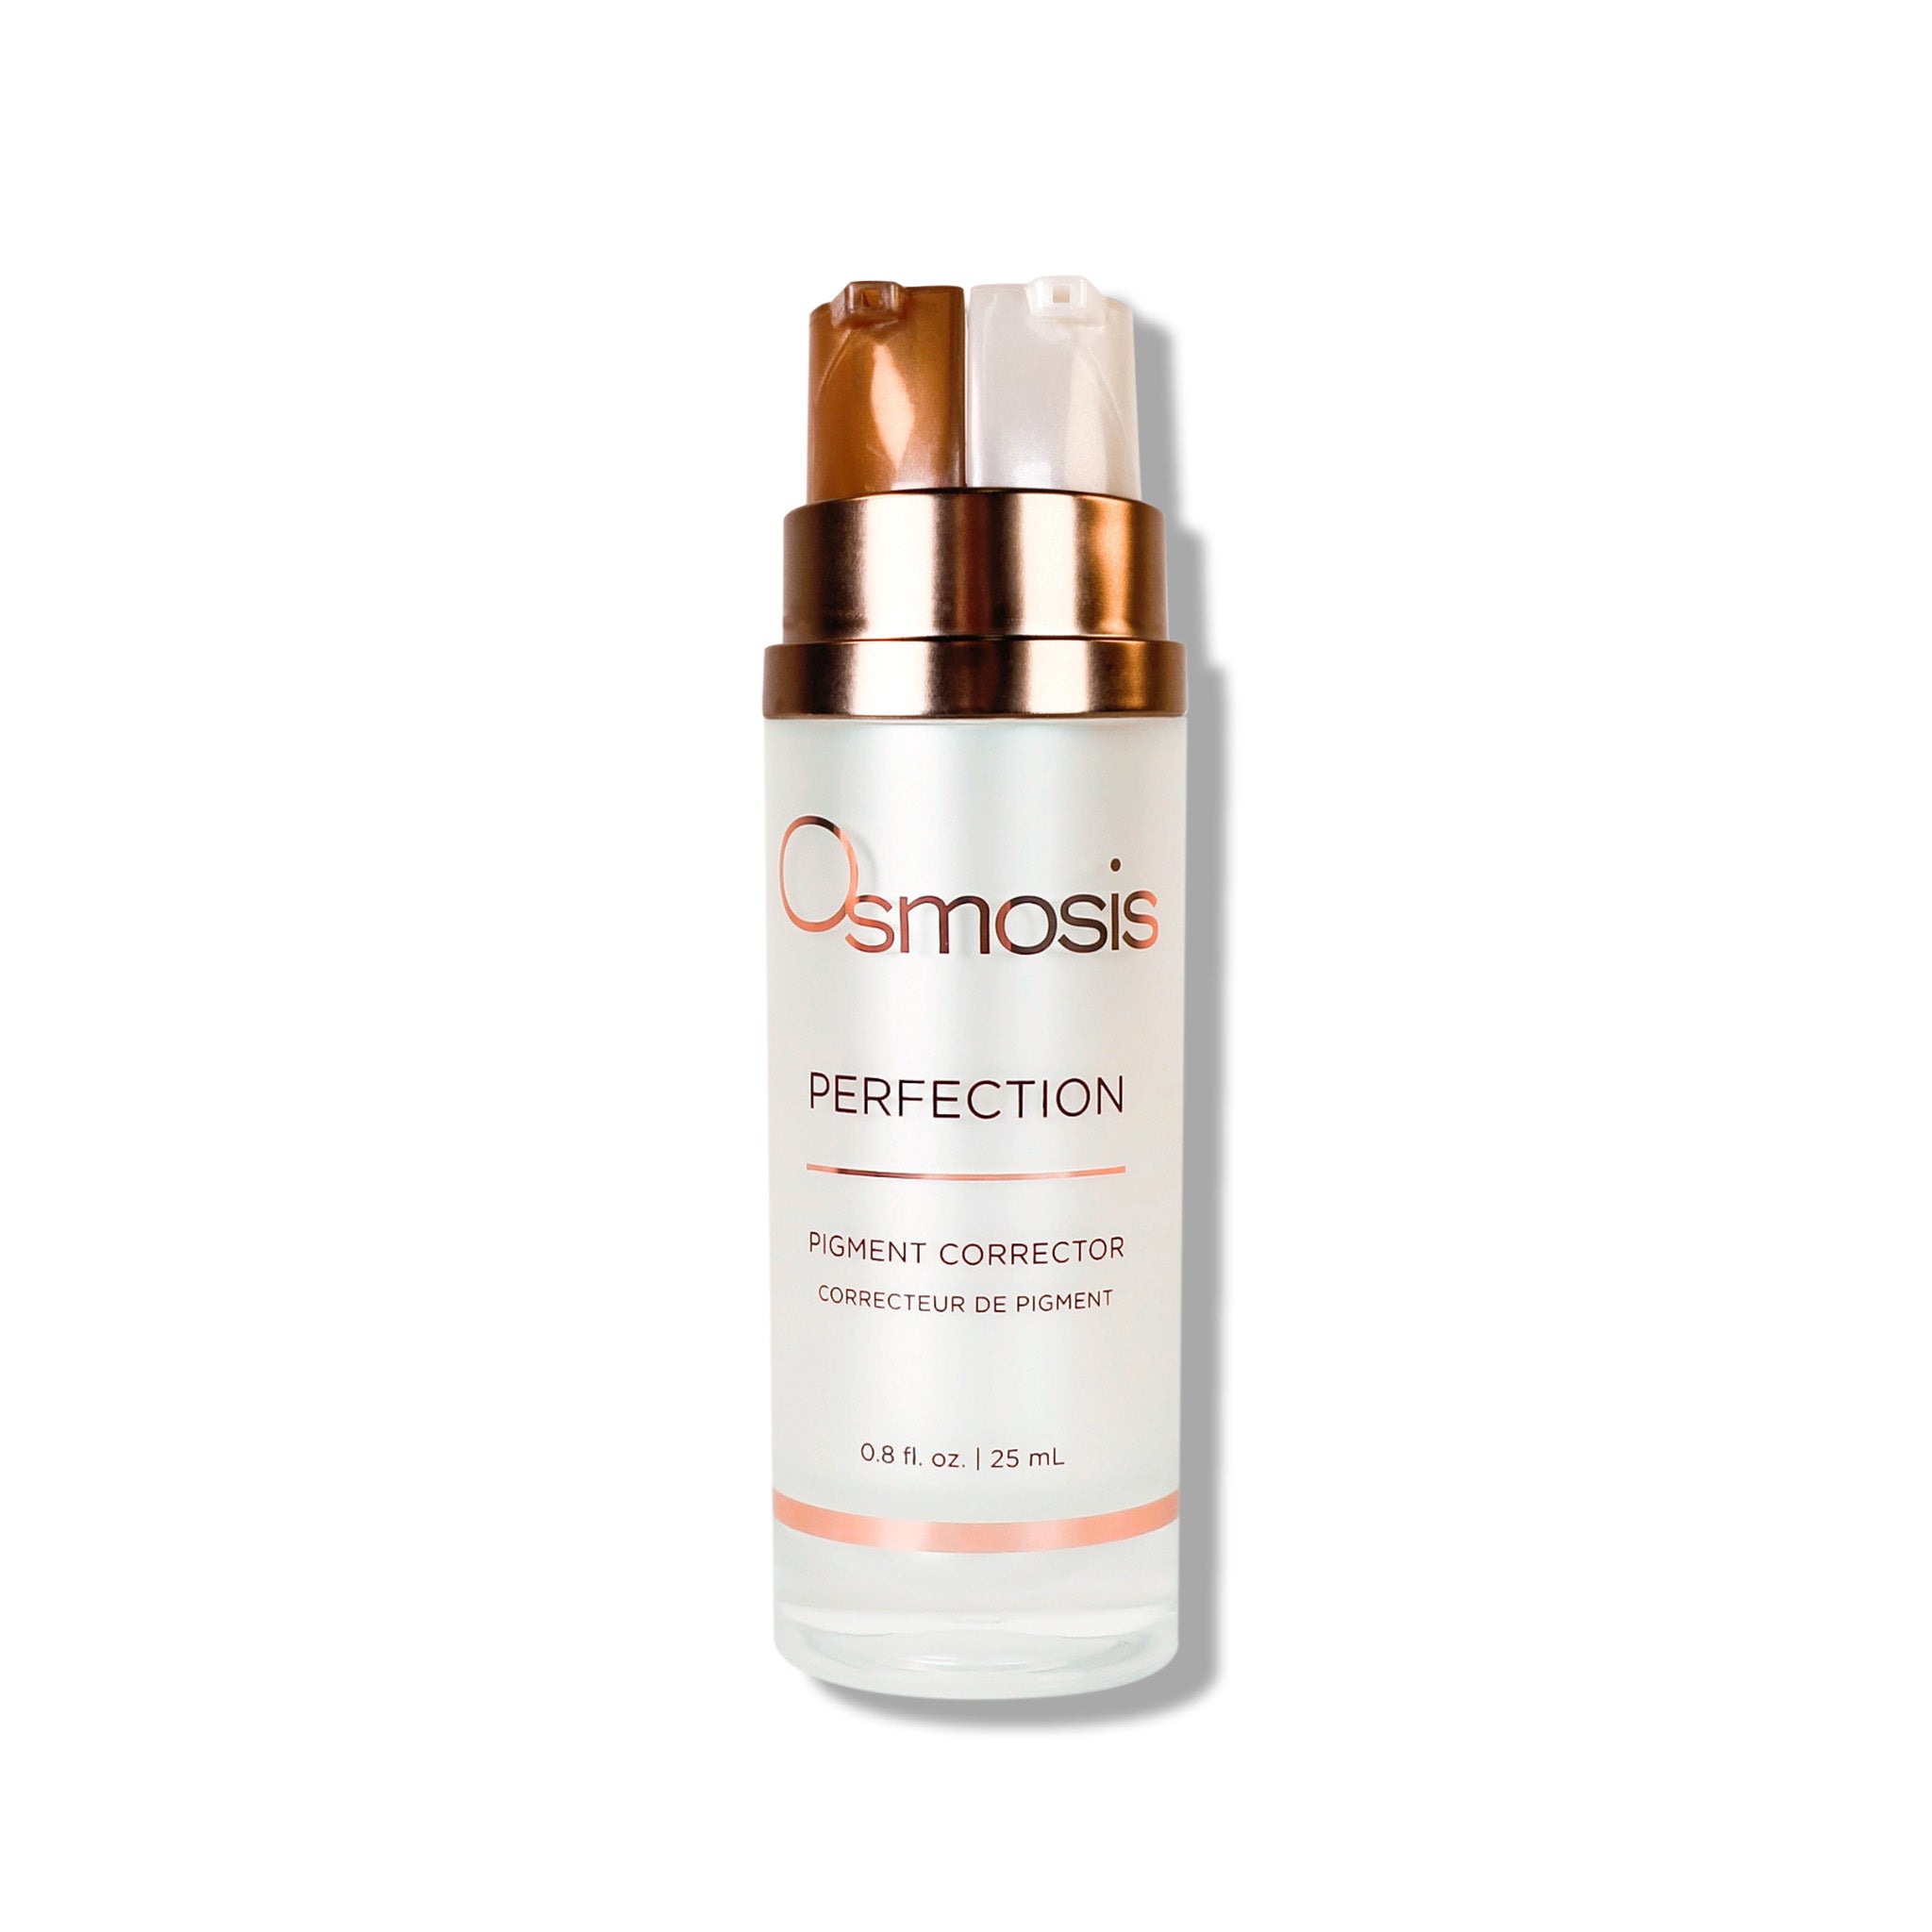 Osmosis Perfection Serum is a gentle spot treatment using a 2 step process to lighten unwanted pigment.